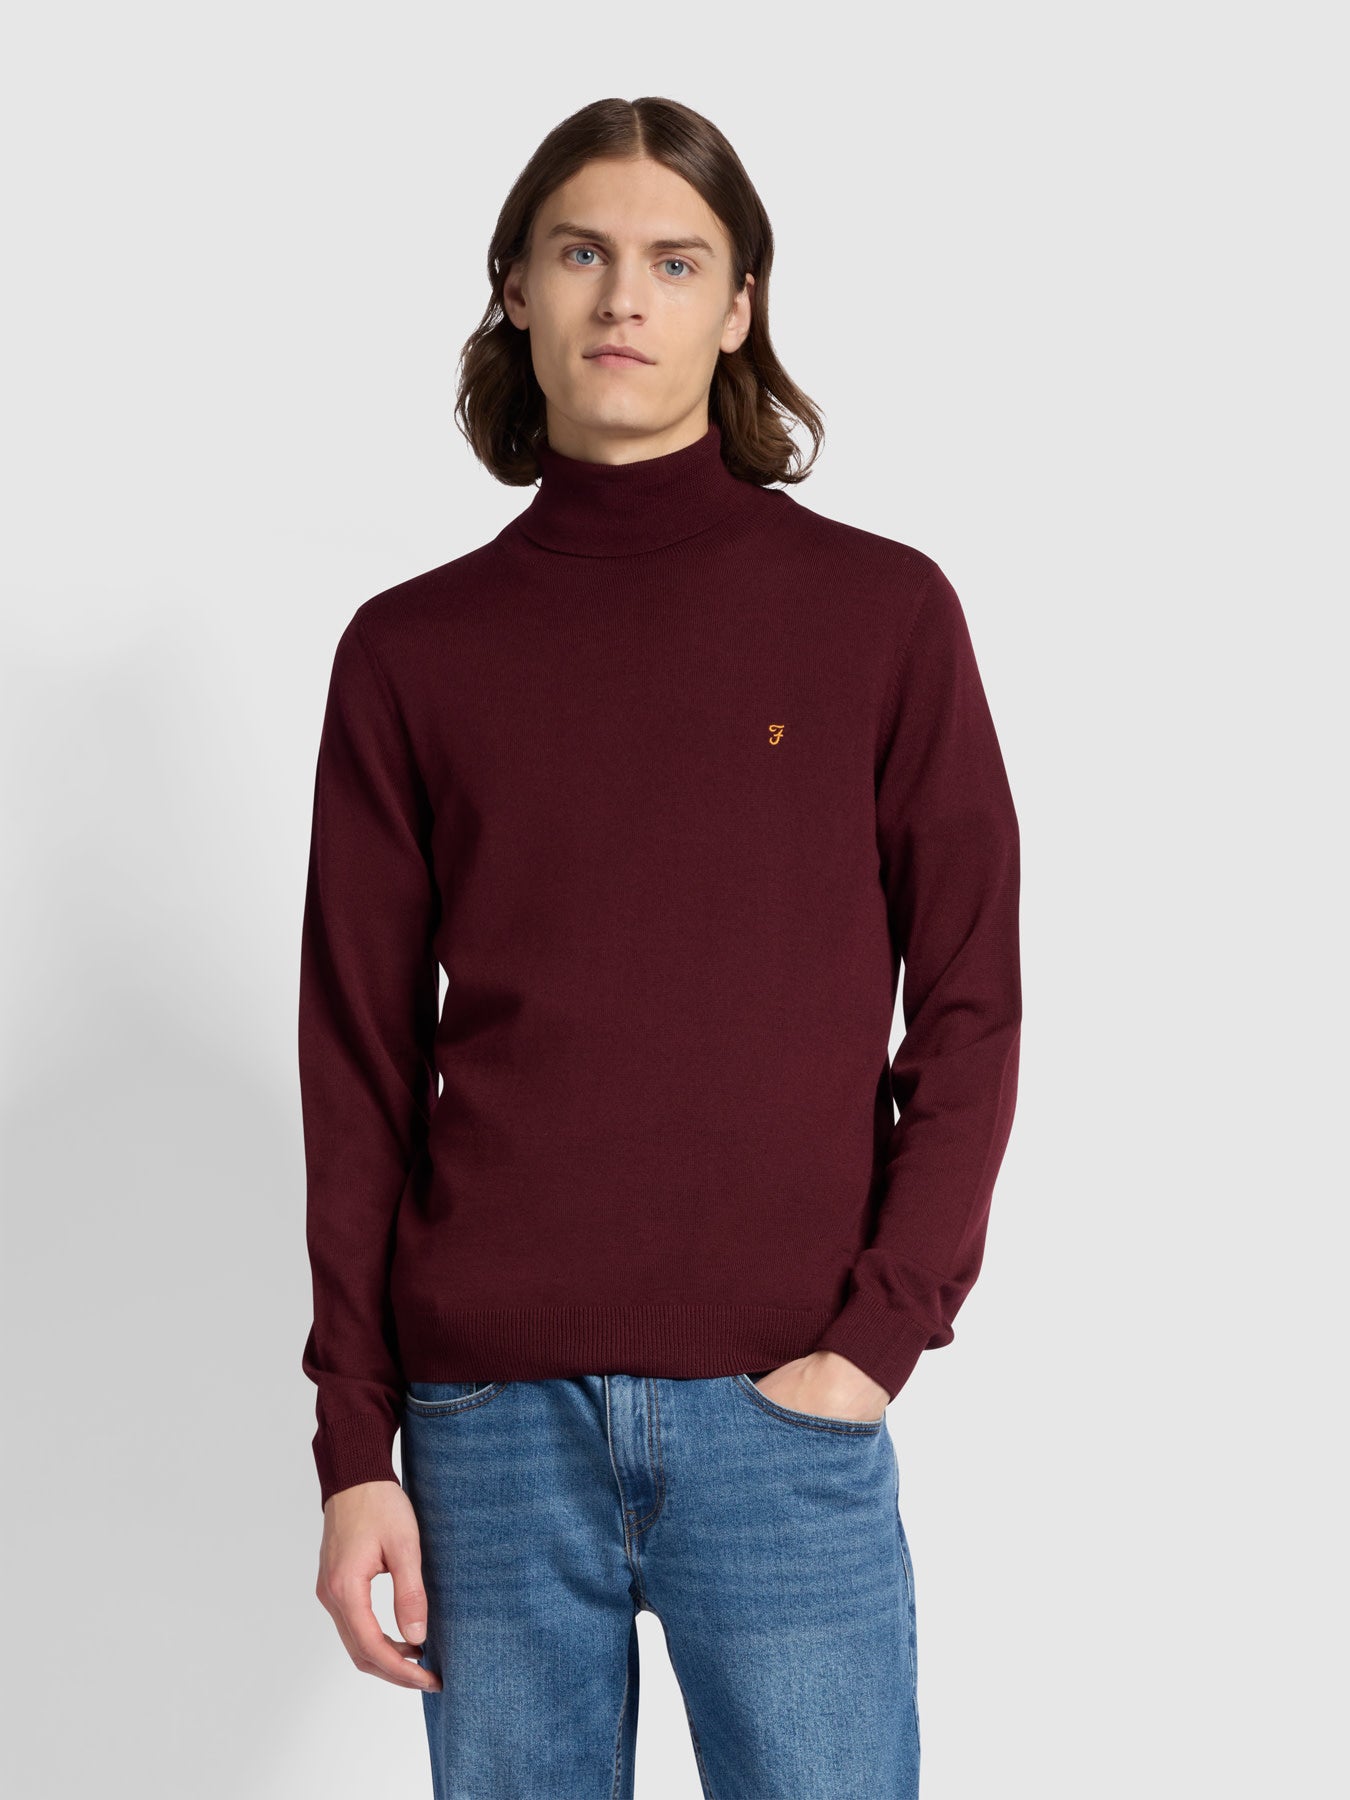 View Gosforth Merino Wool Roll Neck Sweater In Farah Red information